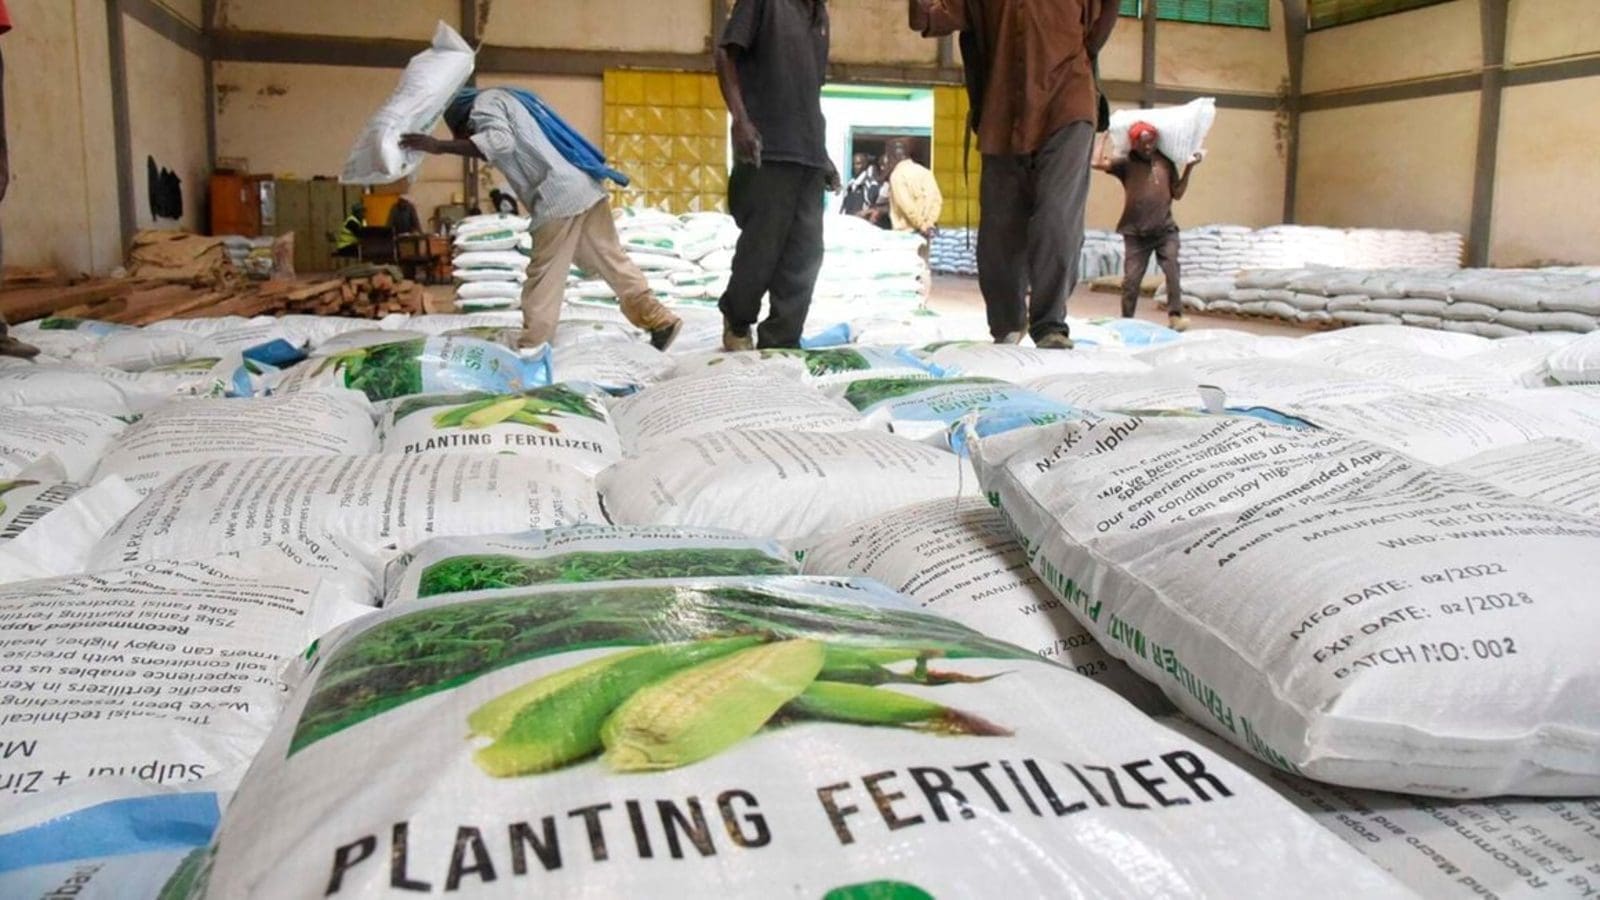 Ministry of Agriculture says subsidized fertilizer lacks DAP due to its acidity nature in soil